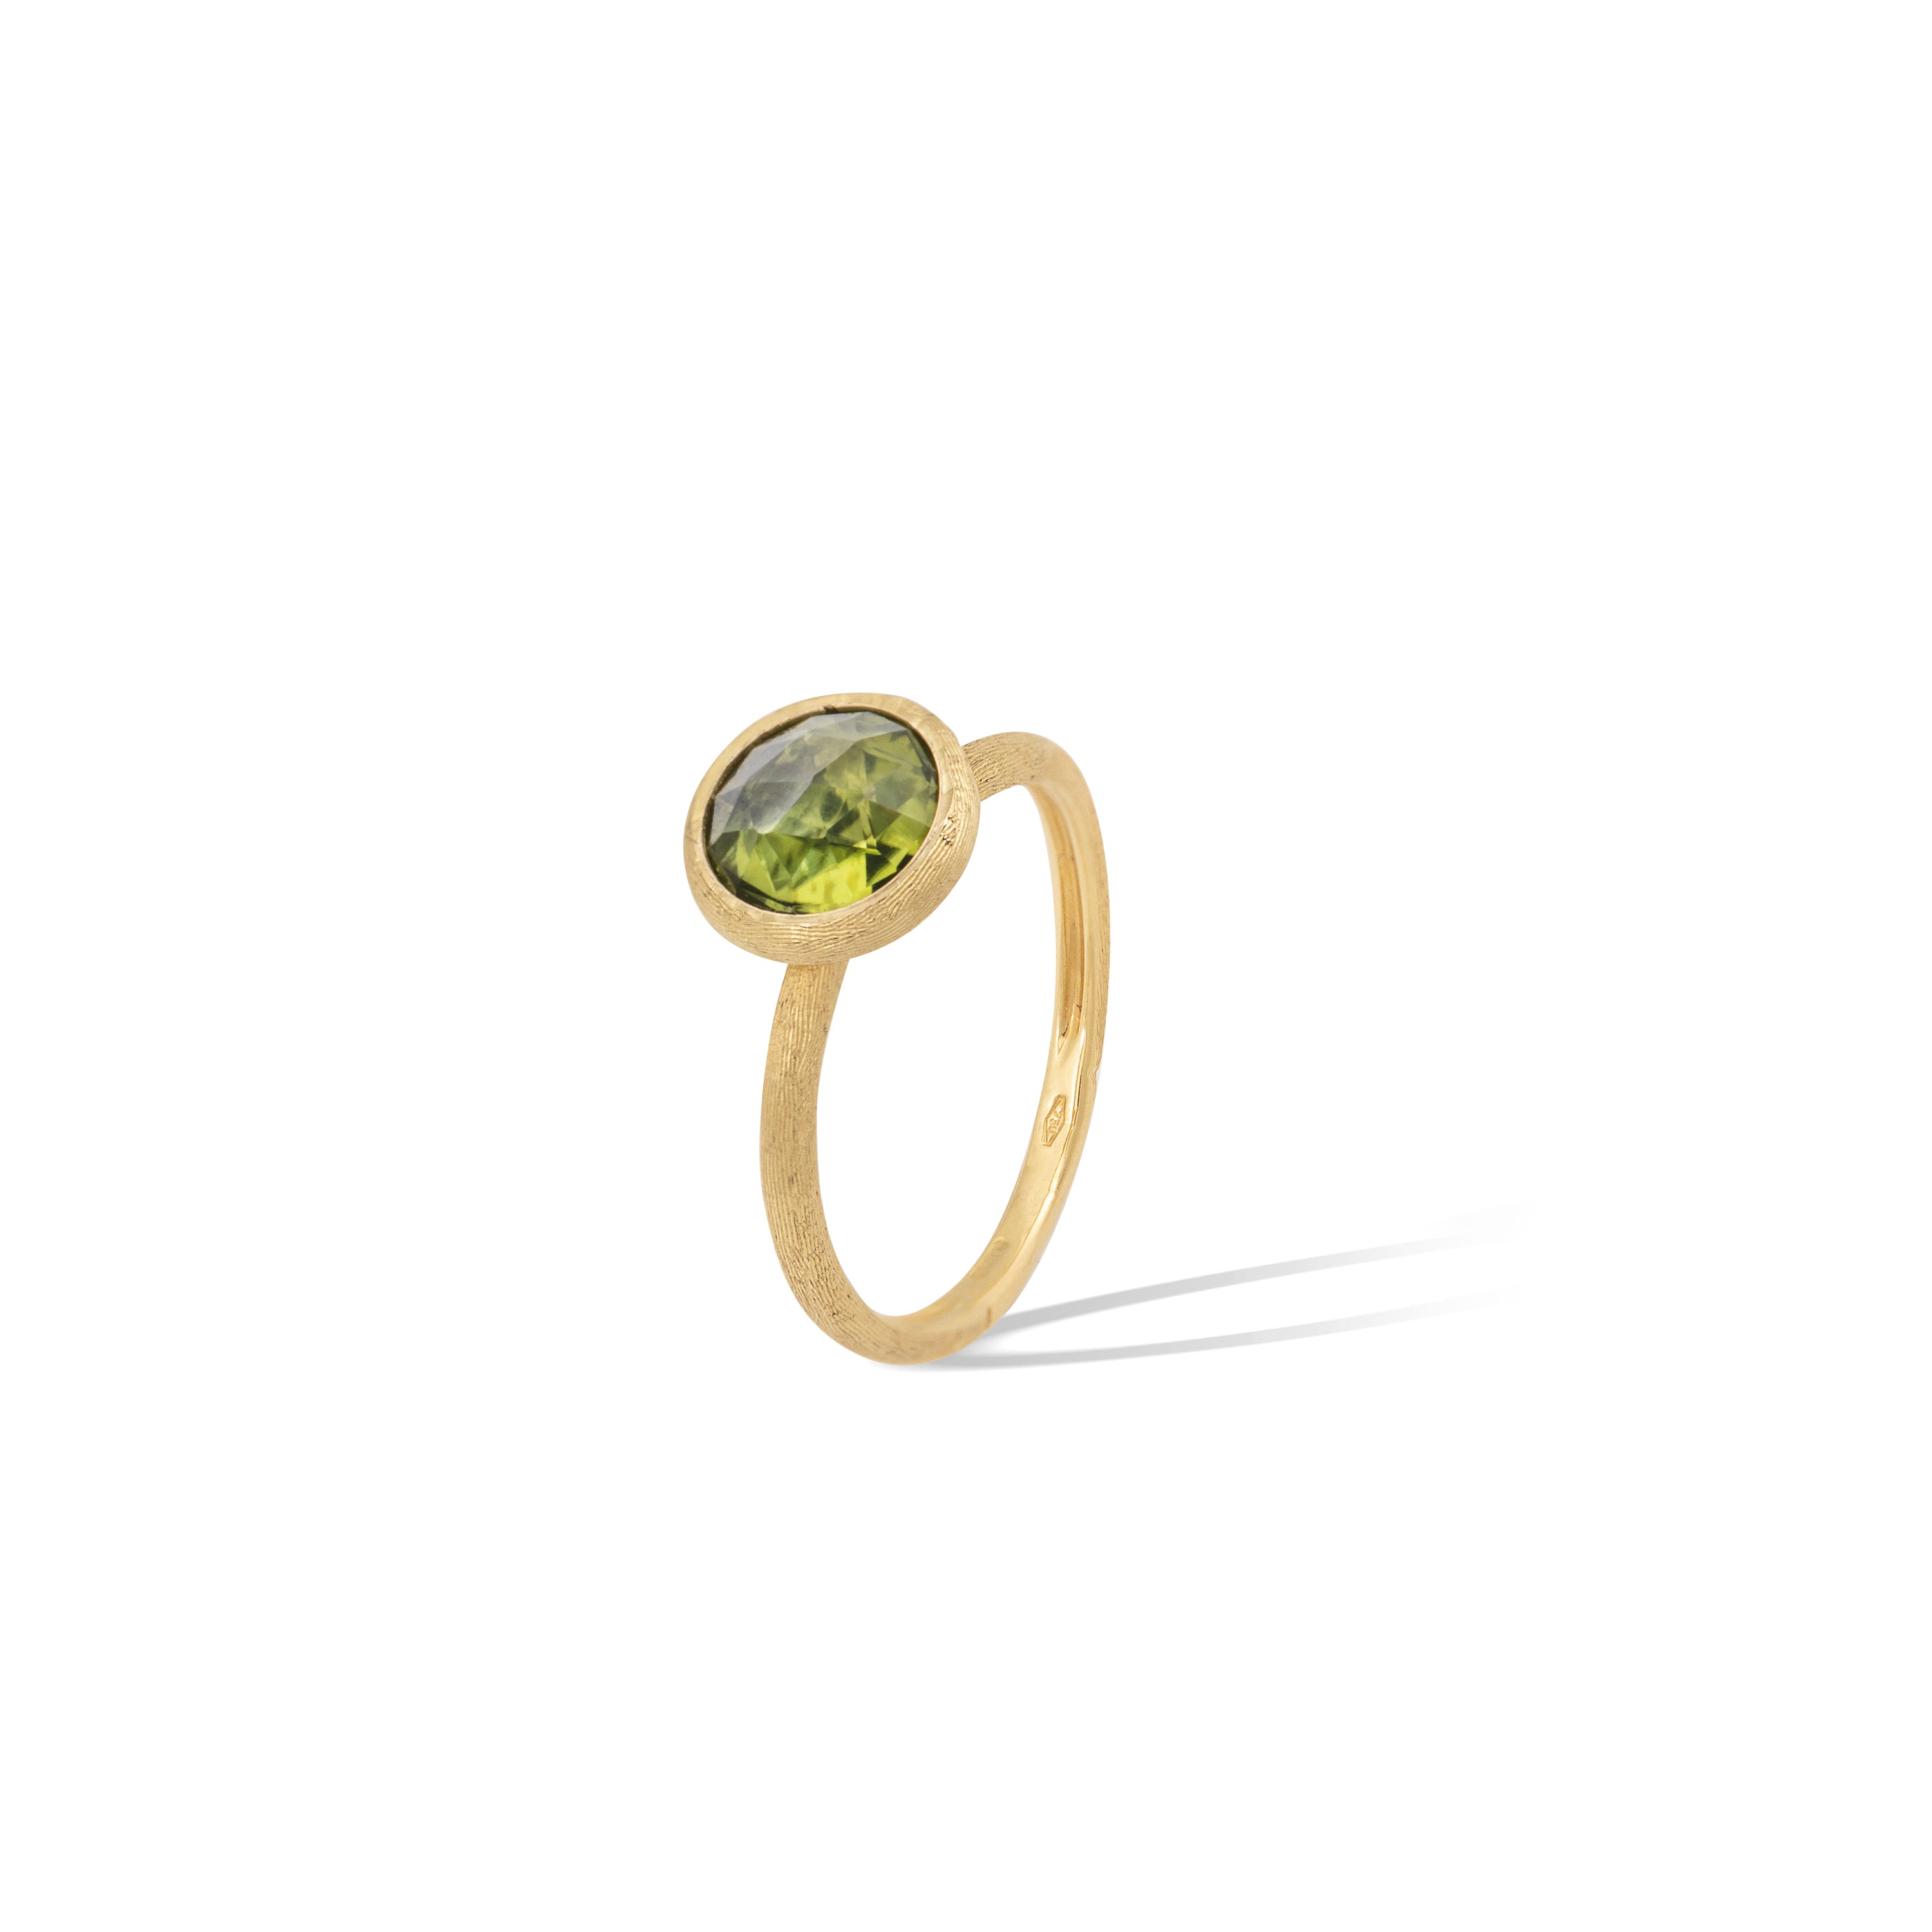 18K YELLOW GOLD PERIDOT RING FROM THE JAIPUR COLLECTION